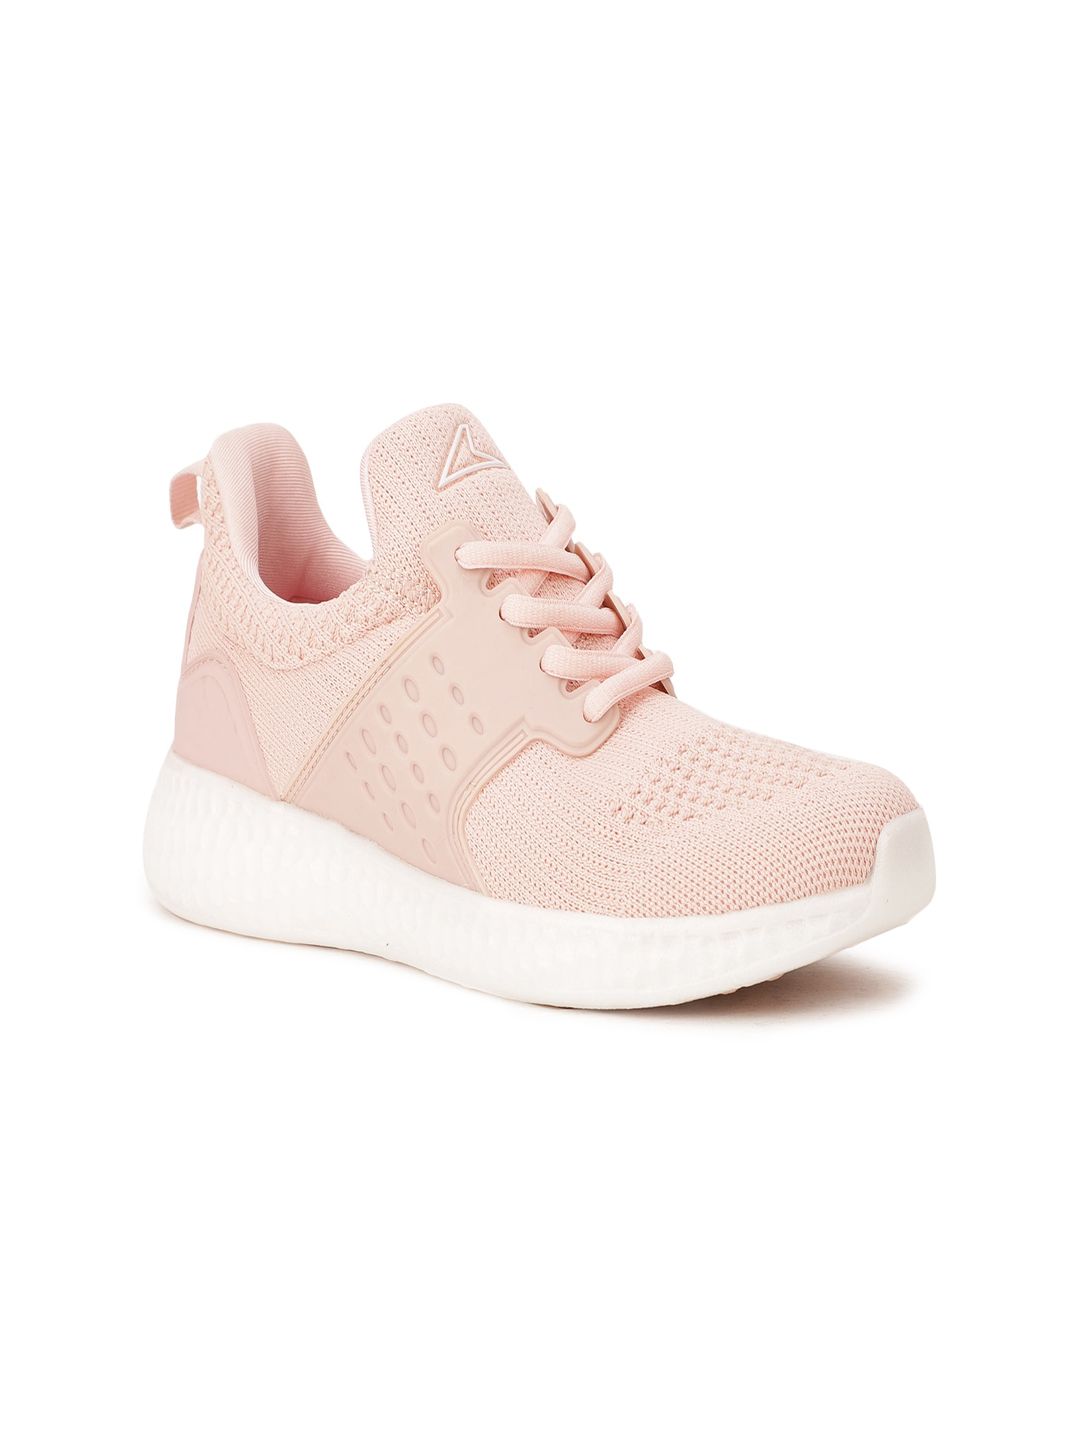 Power Women Pink Woven Design Sneakers Price in India